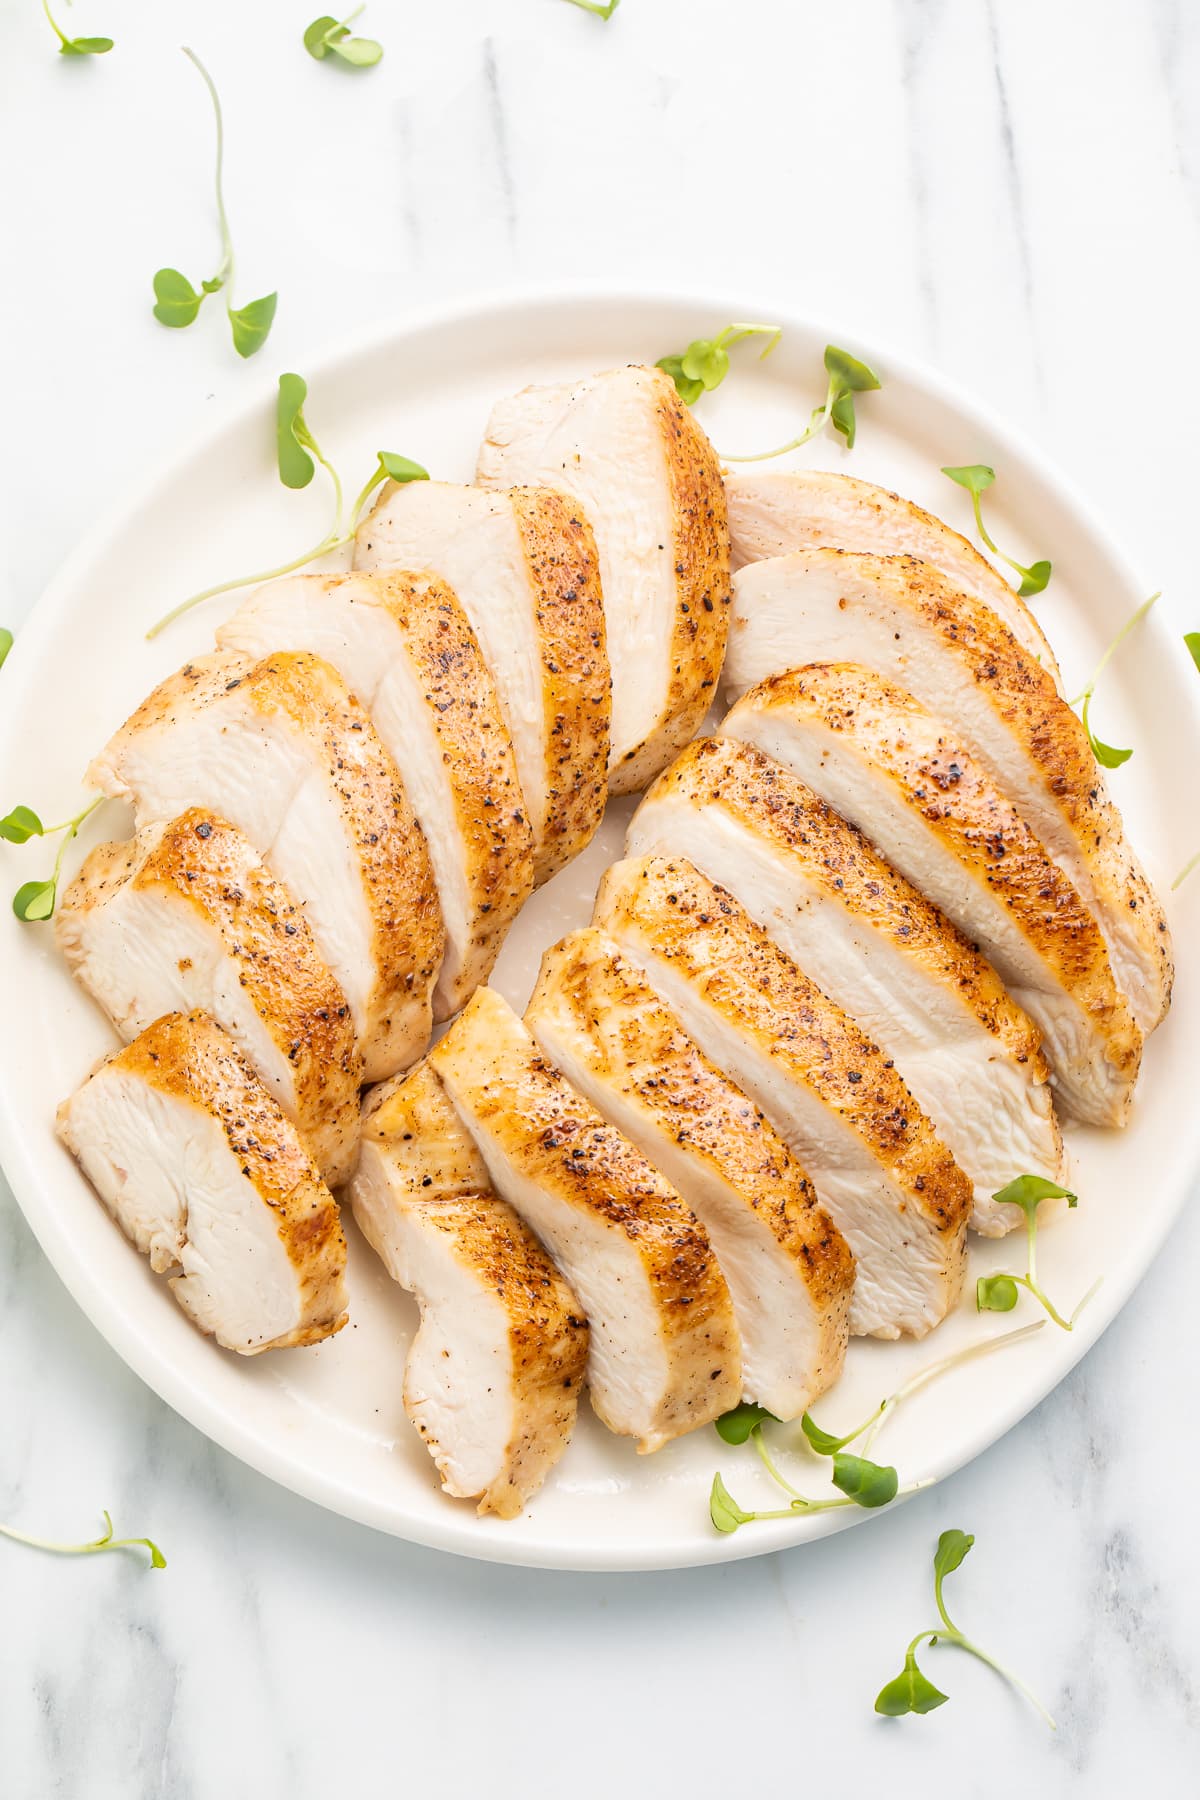 Overhead view of two sliced sous vide chicken breasts arranged on a white plate.